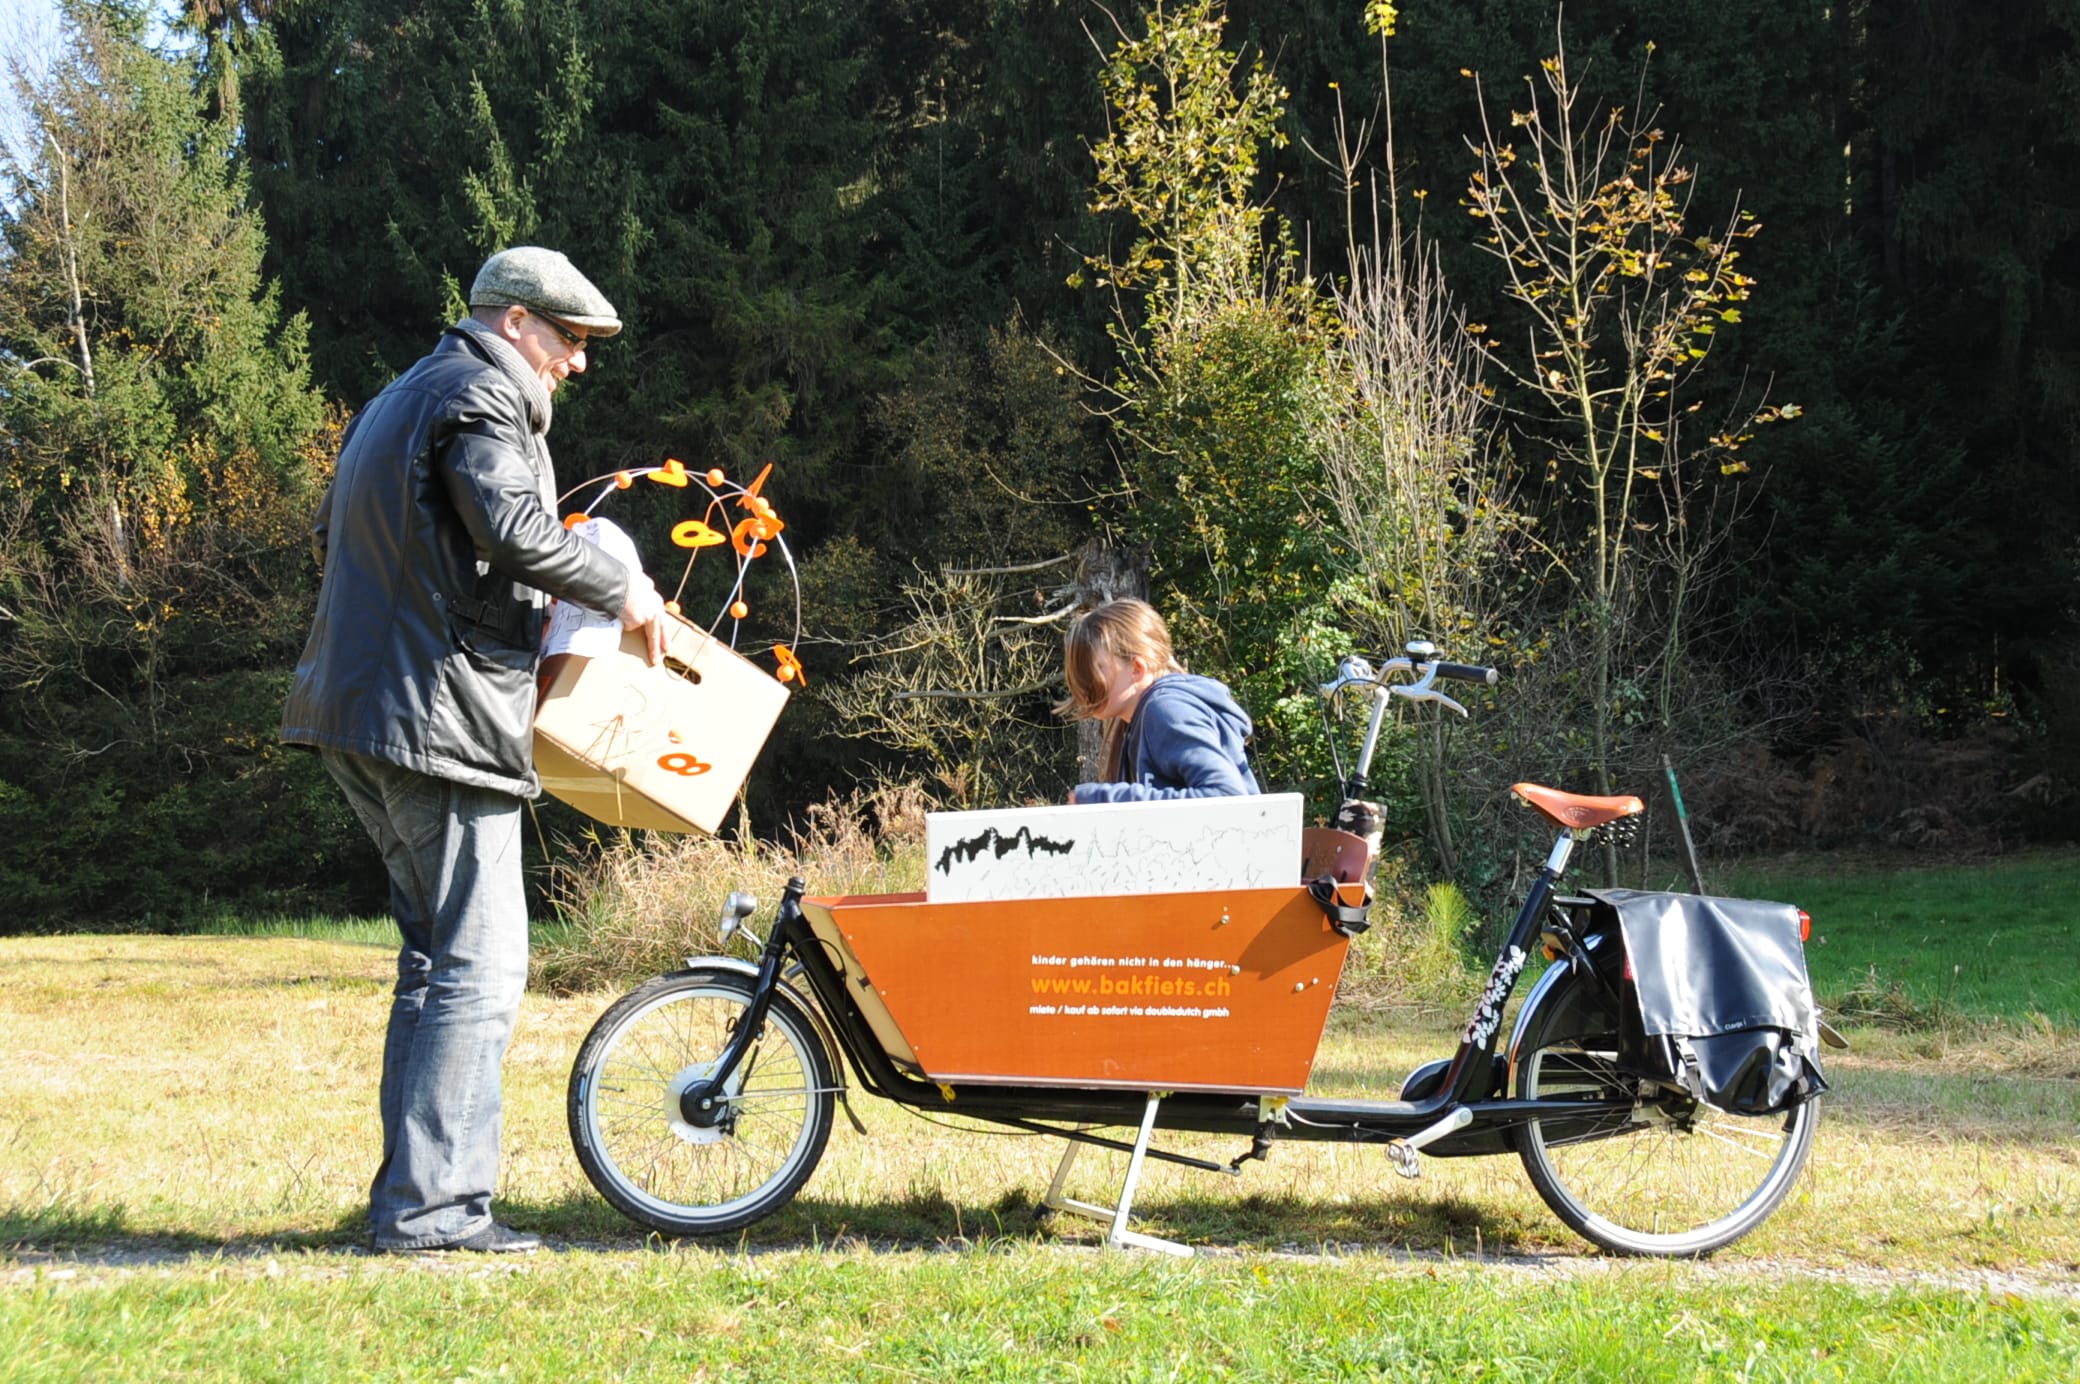 The means of transport: Sjoerd, Anne-Sophie, box, Bakfiets delivery bike…